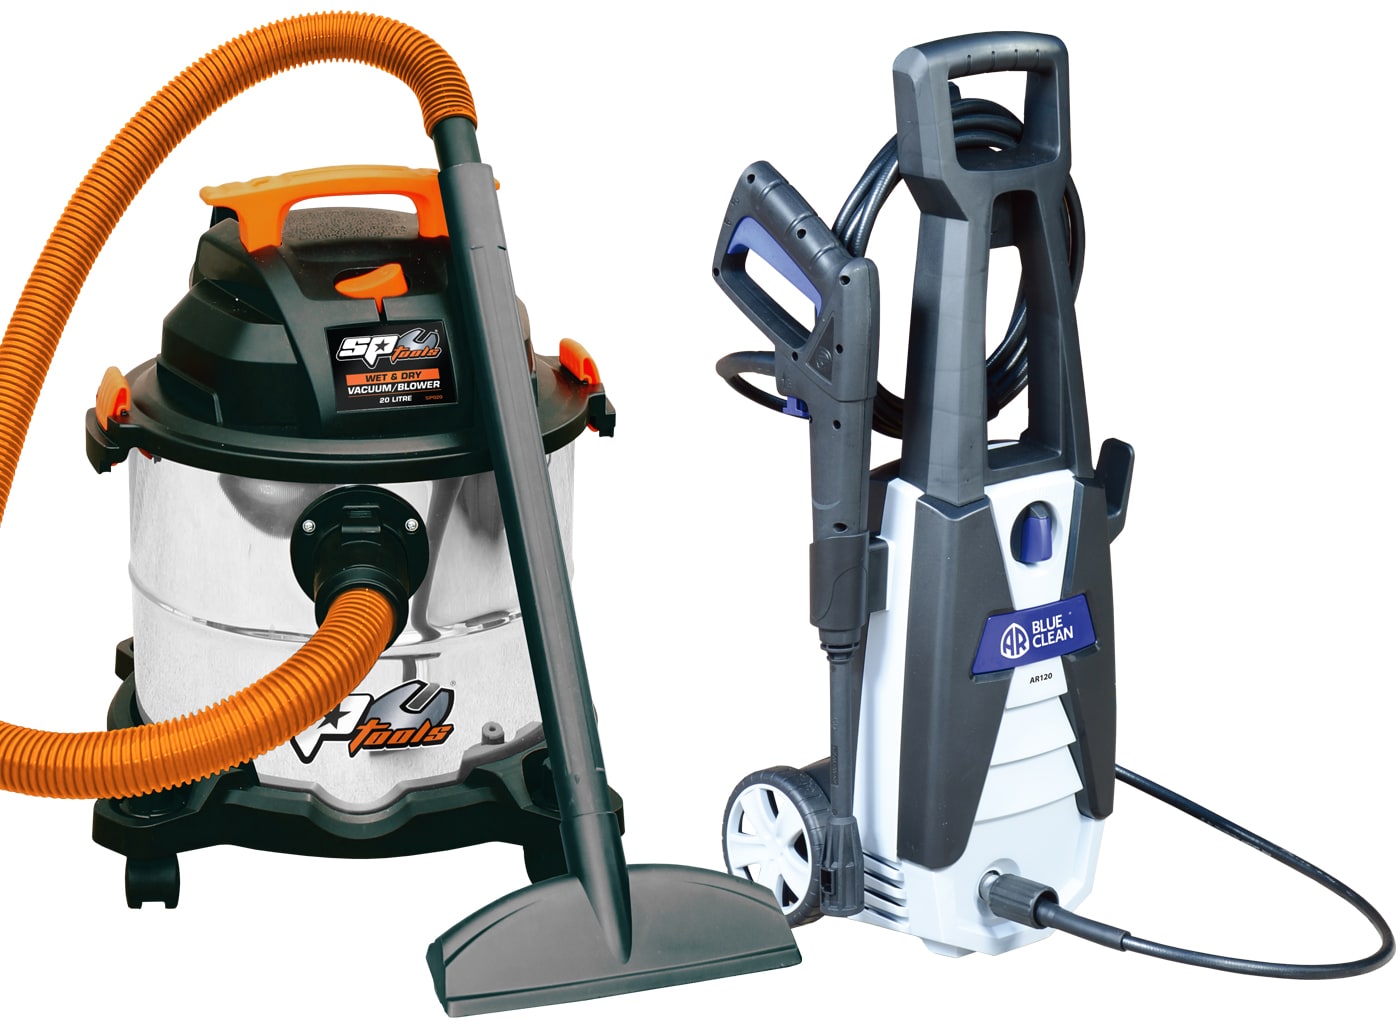 Workshop Clean Up Combo Kit - SP2020 by SP Tools